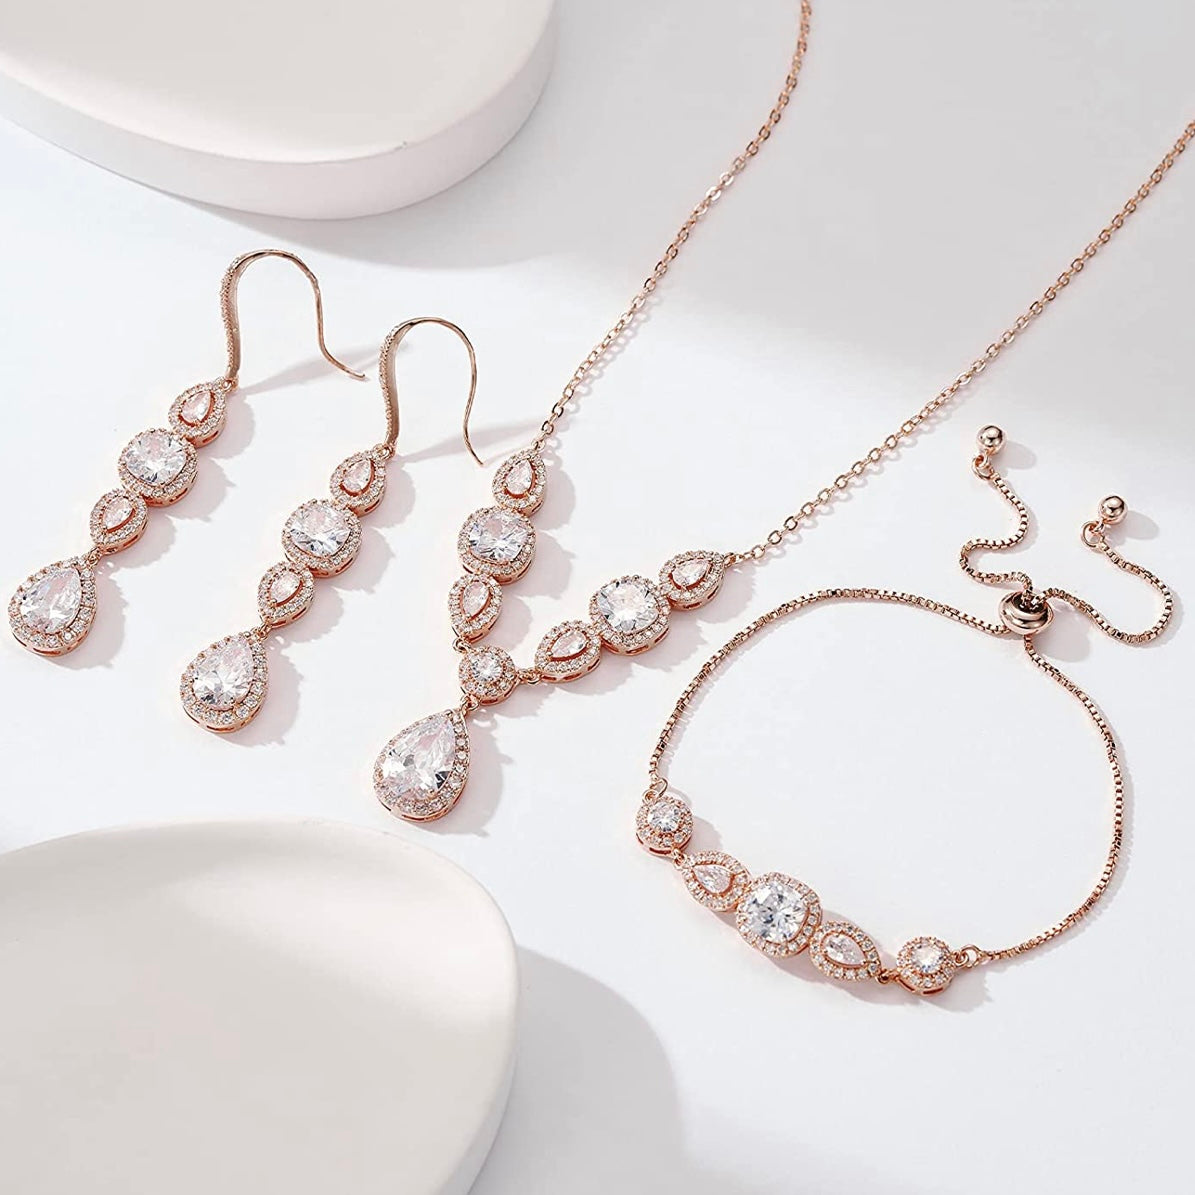 99% Rose Gold Necklace Pendant Set at Rs 50000/set in Surat | ID:  2850522877173